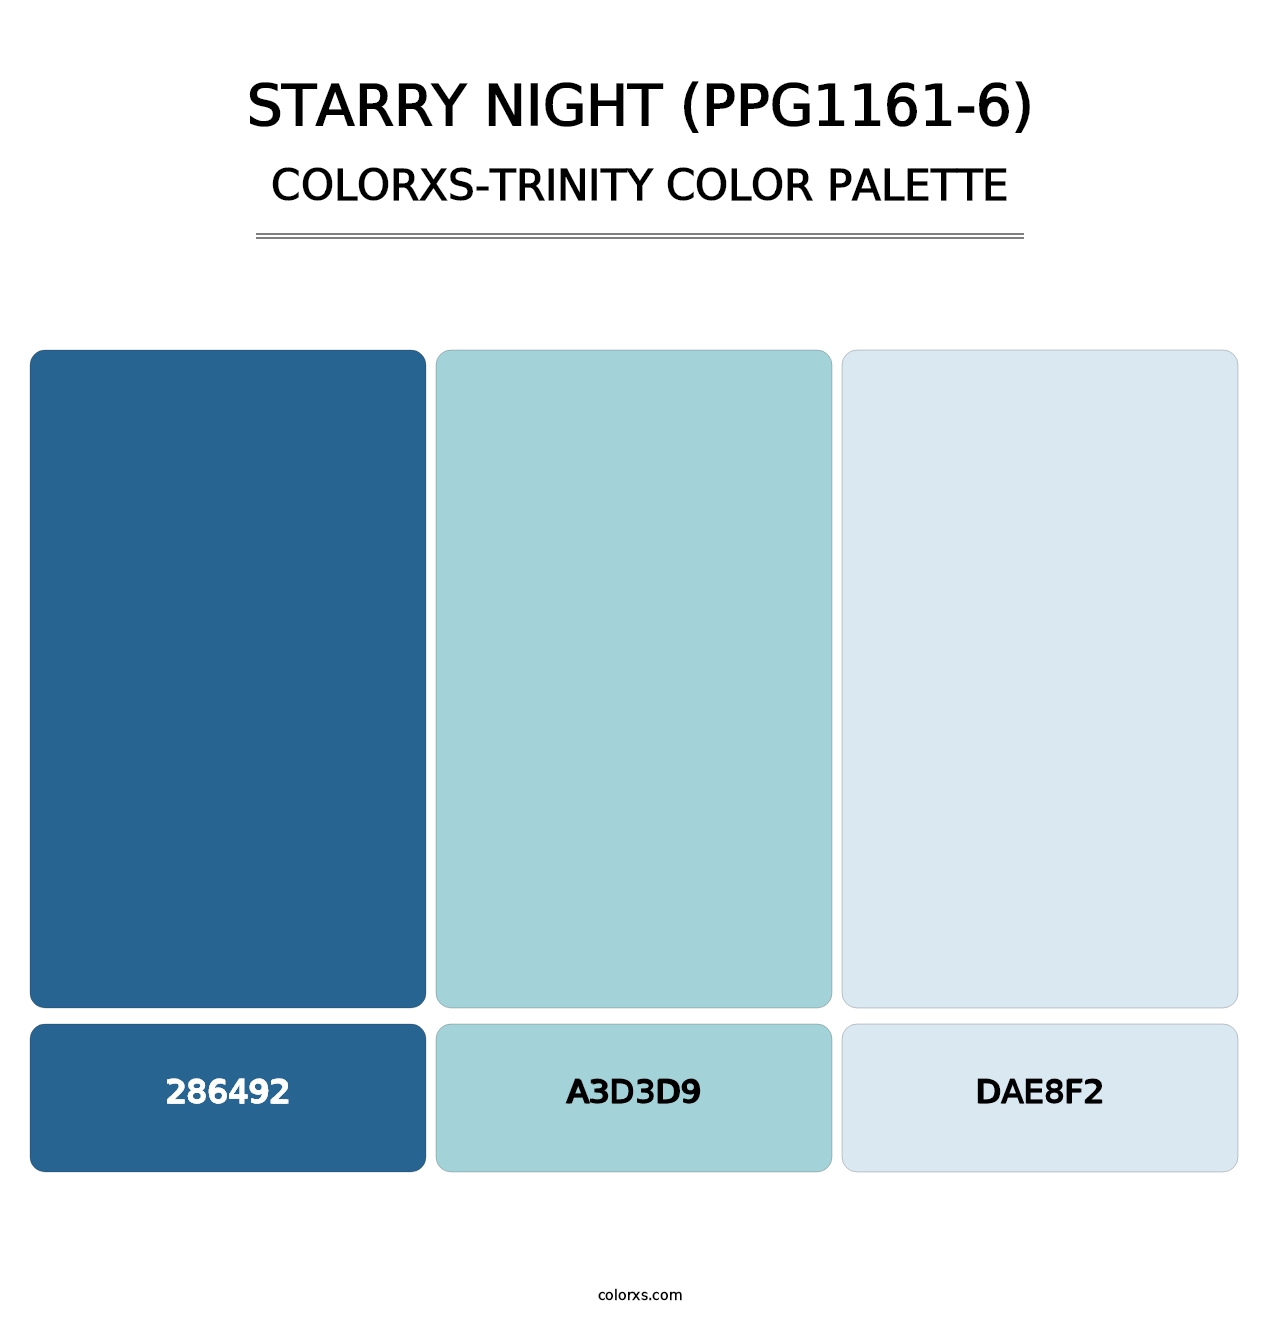 Starry Night (PPG1161-6) - Colorxs Trinity Palette